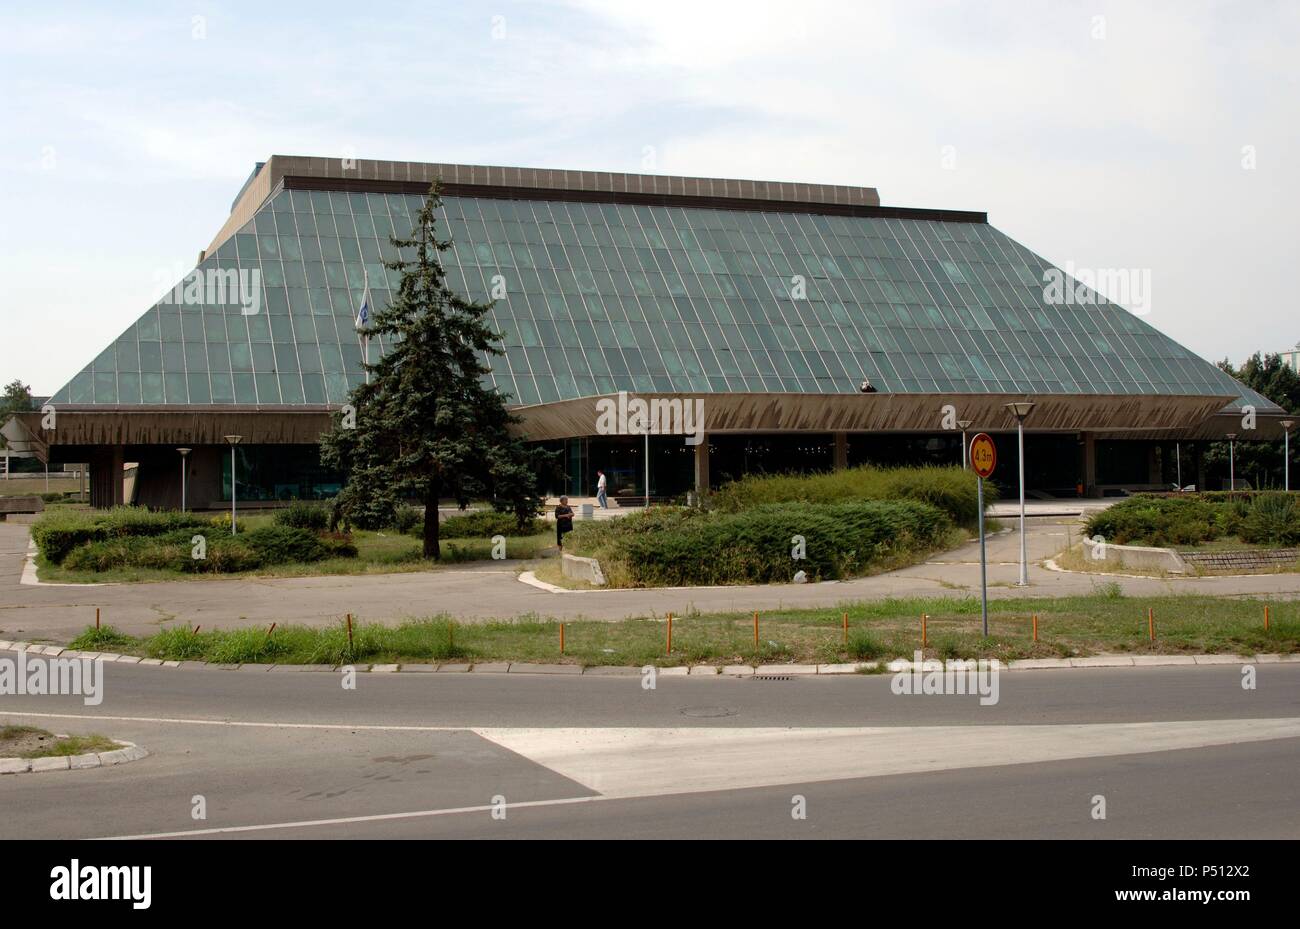 Building Sava Centar, International Congress Center and cultural activities. Construction was completed in 1979. It was designed by architect Stojan Maksimovic. Belgrade. Republic of Serbia. Stock Photo